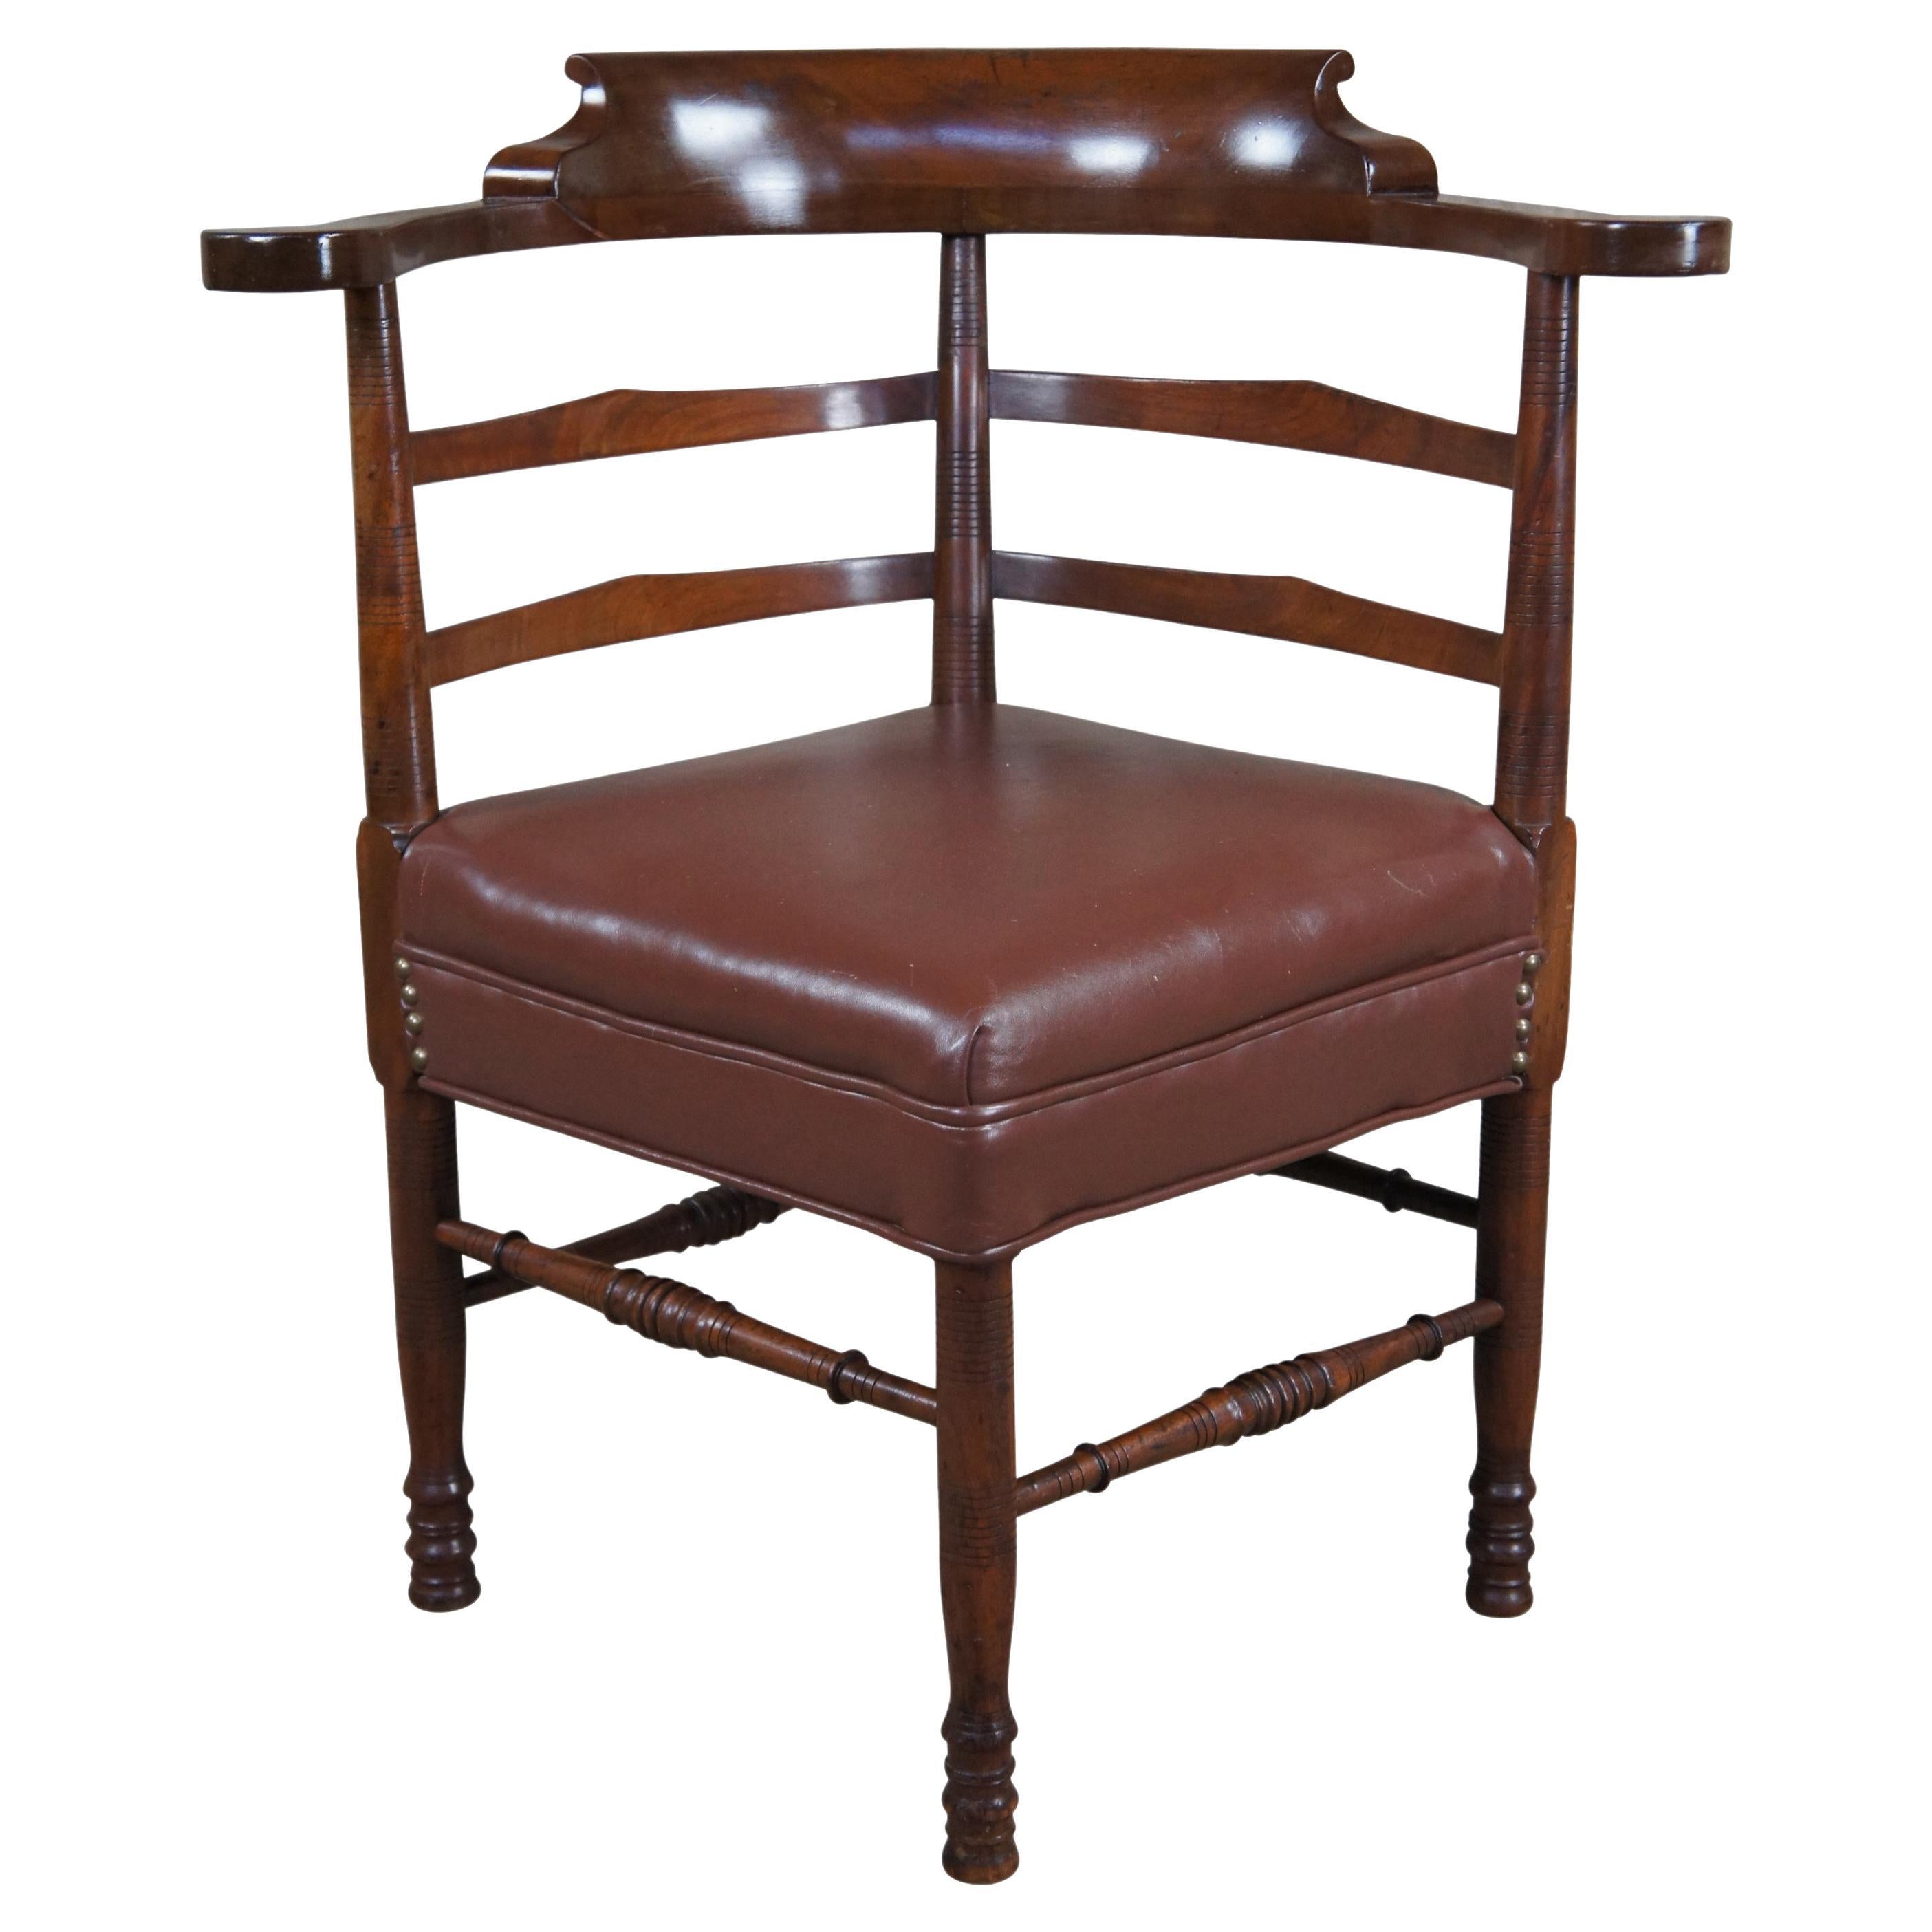 Antique English Country Mahogany Ladderback Roundabout Corner Arm Chair Seat For Sale